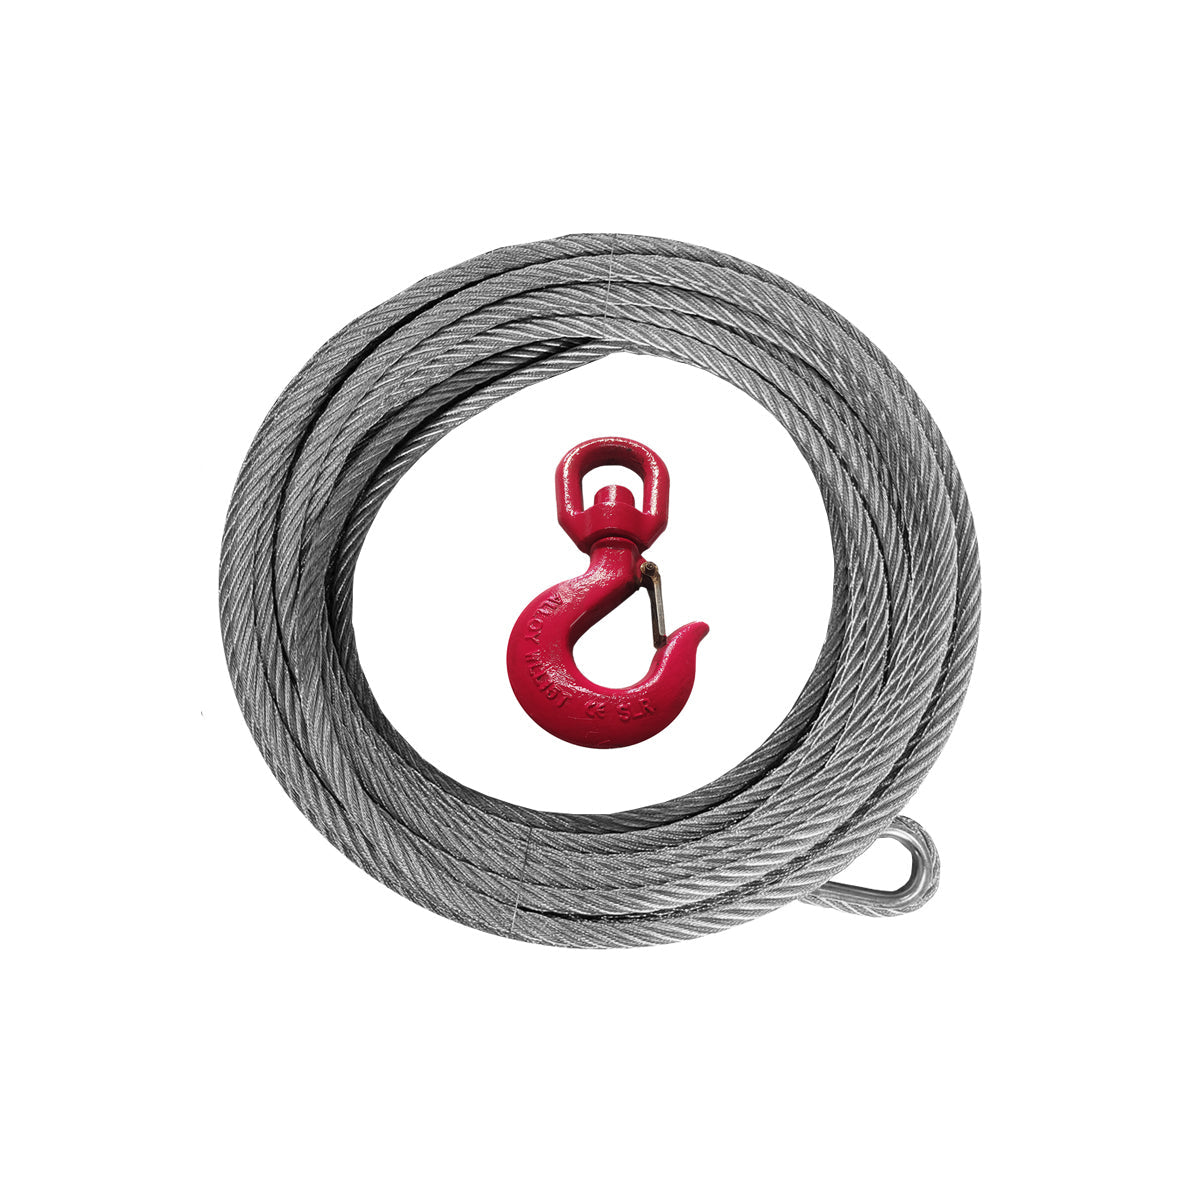 0.79”×131’ Steel Cable with Hook